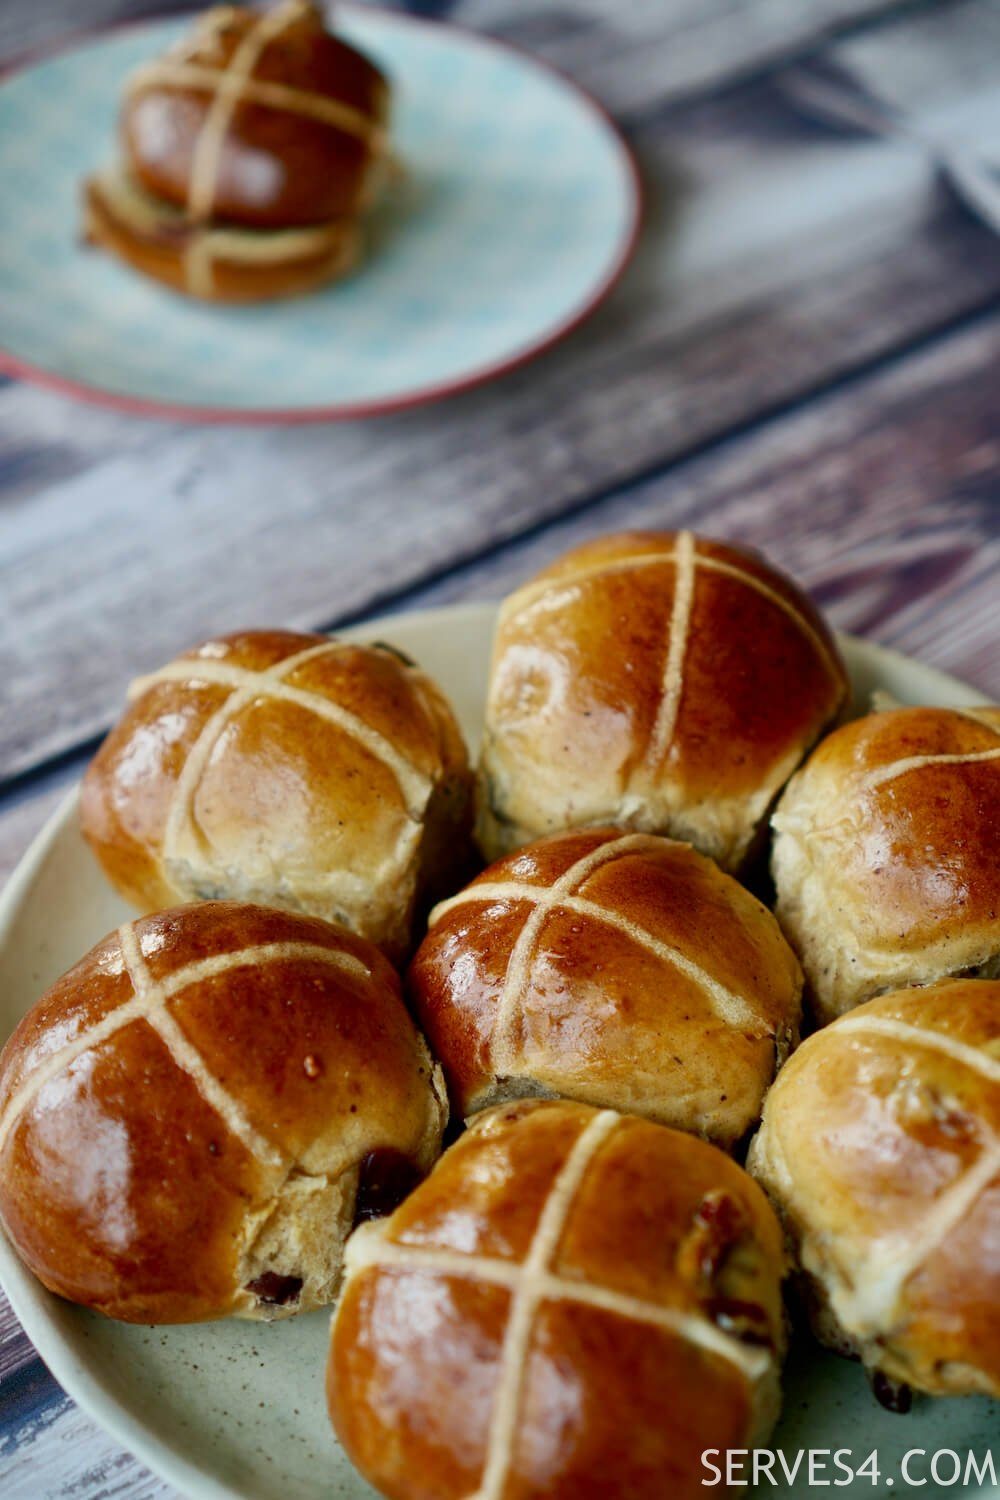 These sweet, spiced and fruity Easter hot cross buns are simply irresistible!